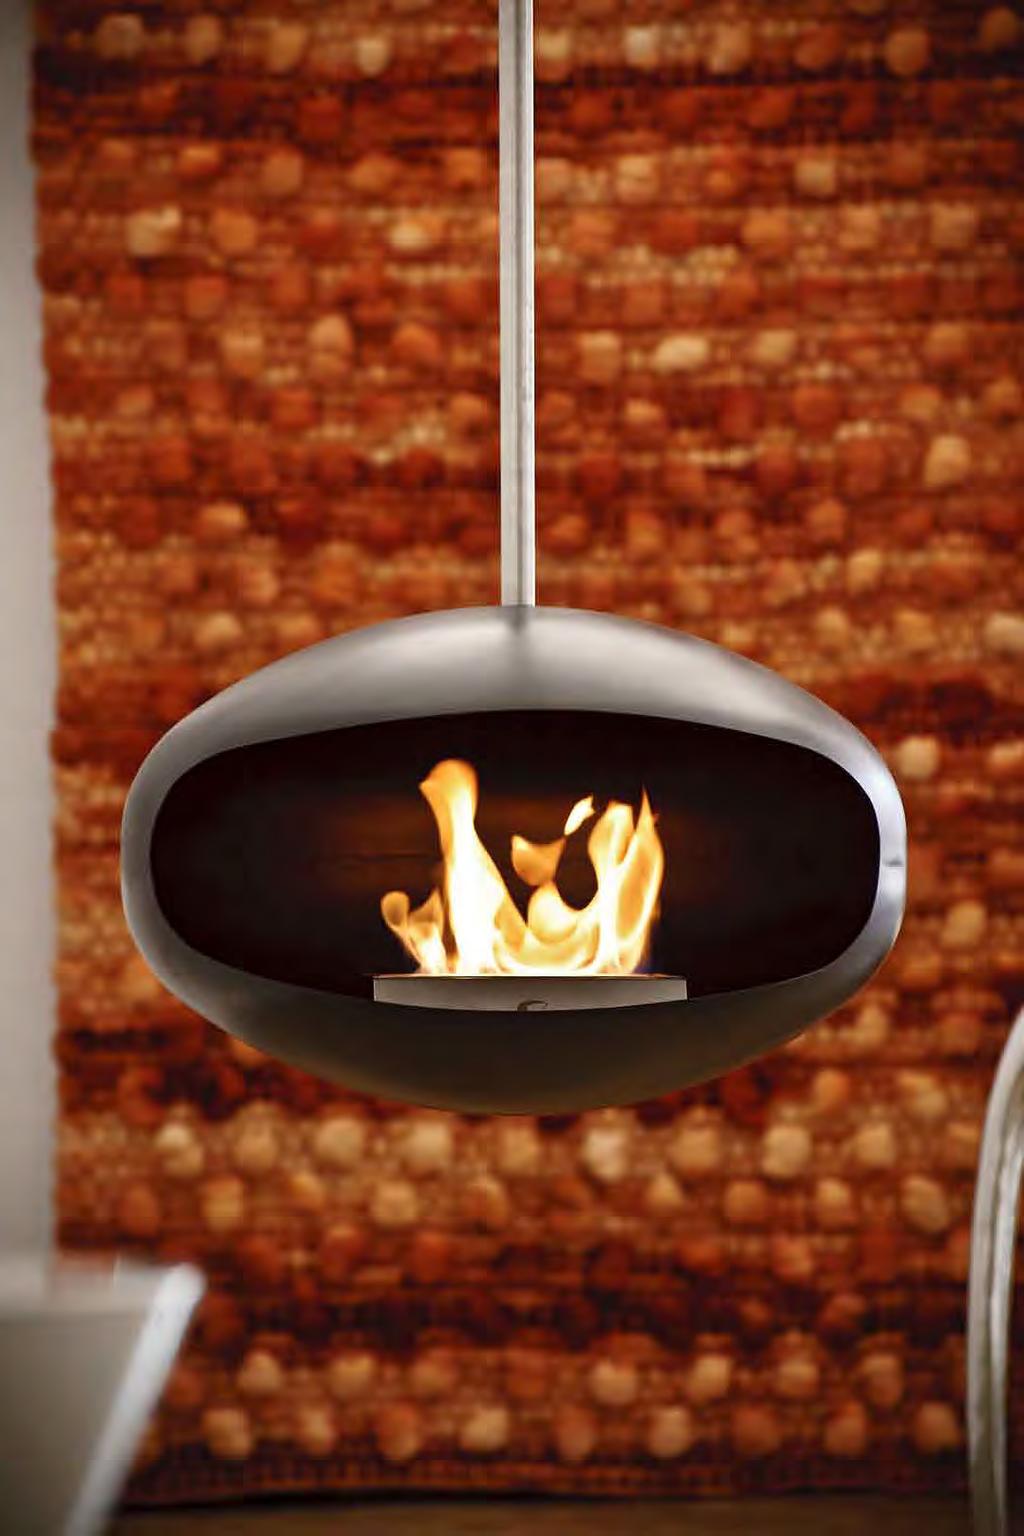 SAFETY AND THE ENVIRONMENT Cocoon Fires are manufactured to the highest quality with a focus on safety. Our products meet the highest international standards for safety and quality.